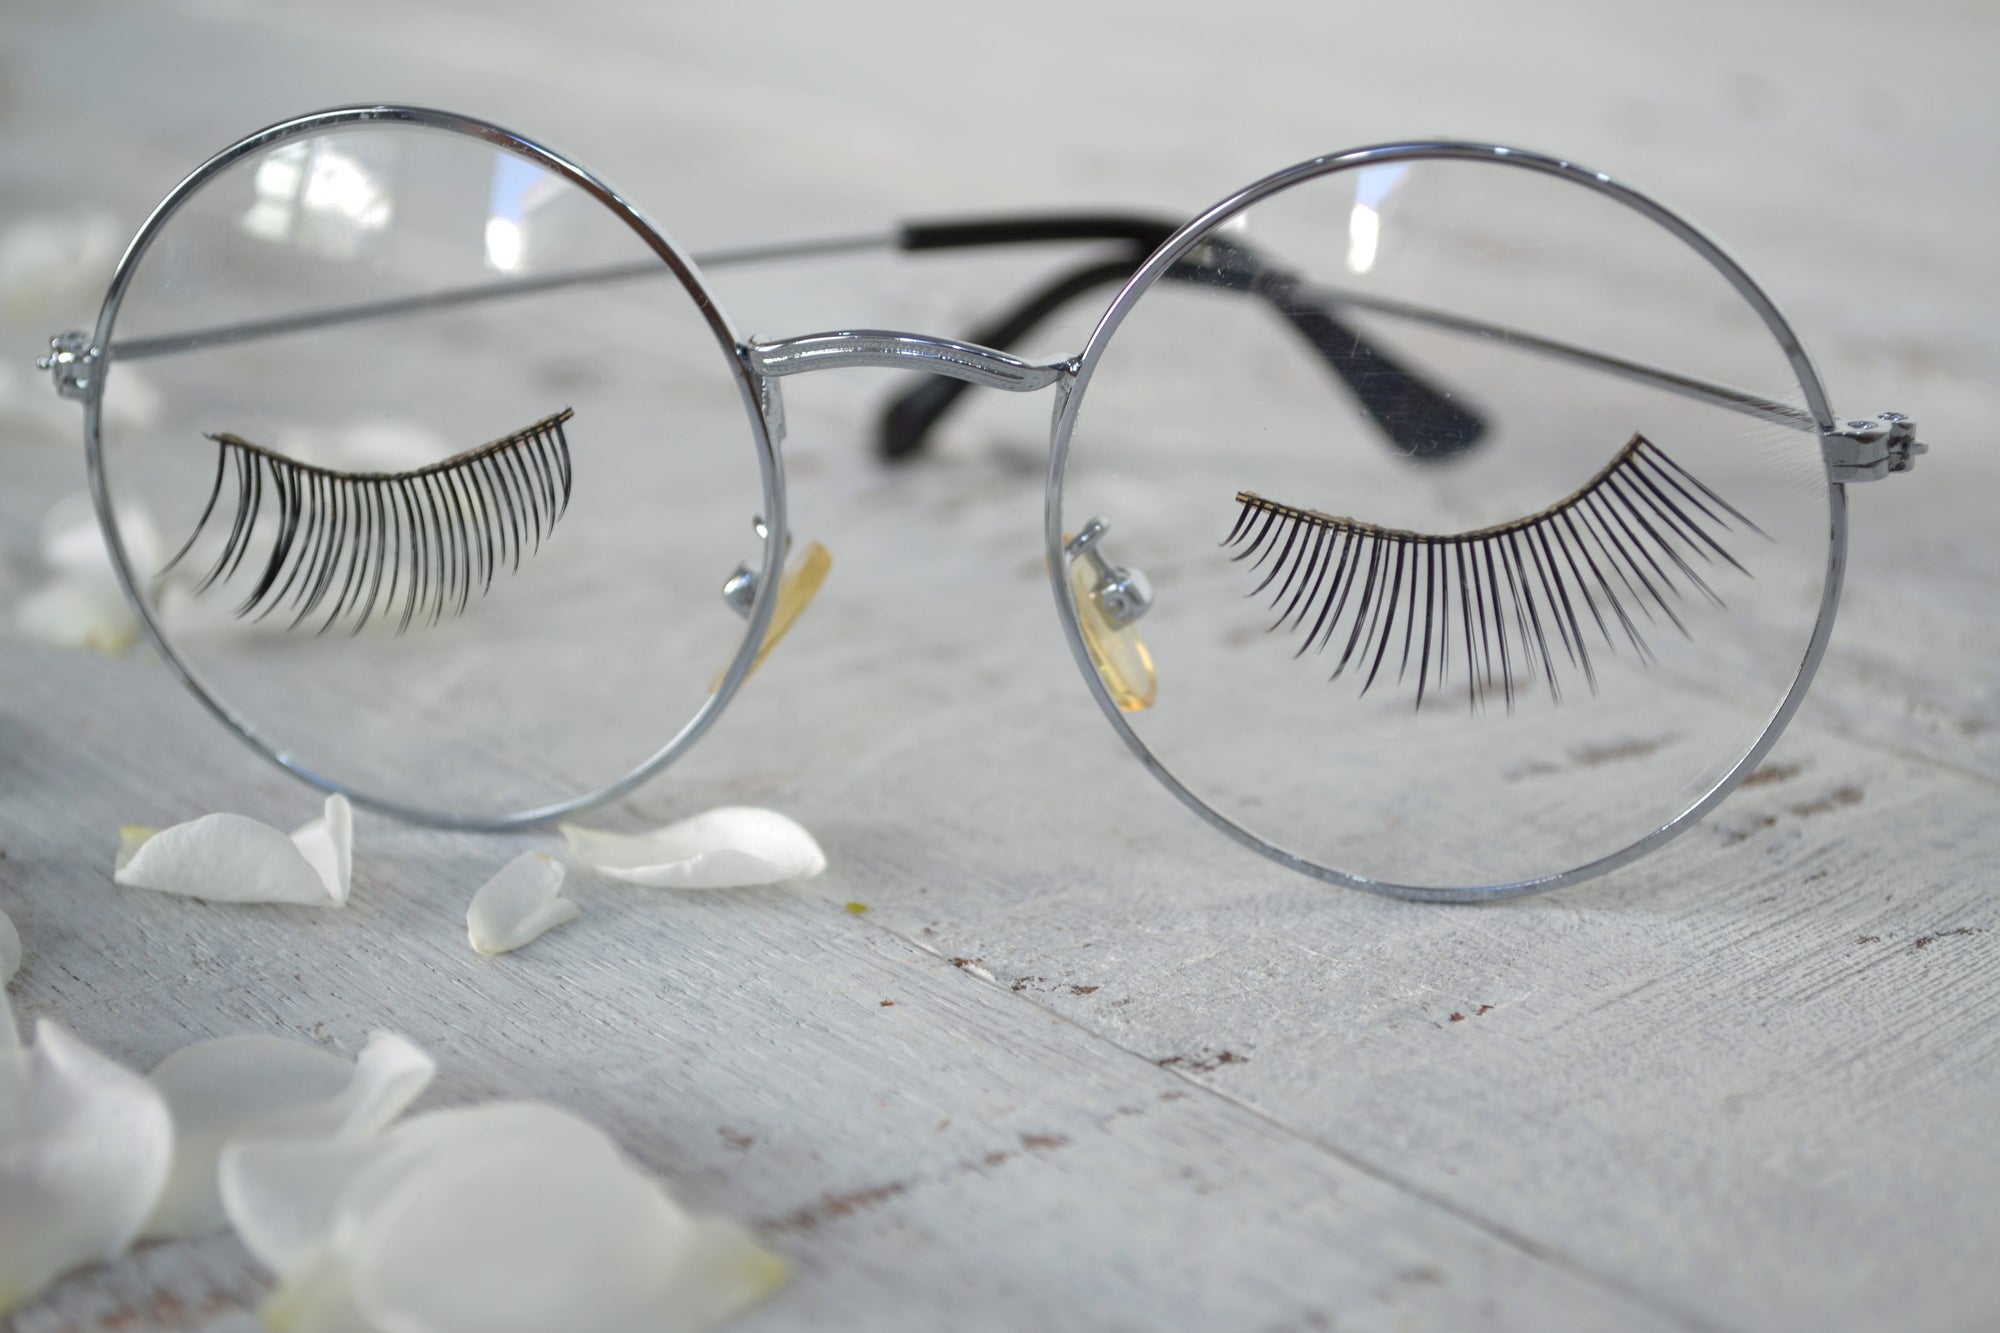 Tips for Applying Eyelash Extensions on Glasses-Wearing Clients